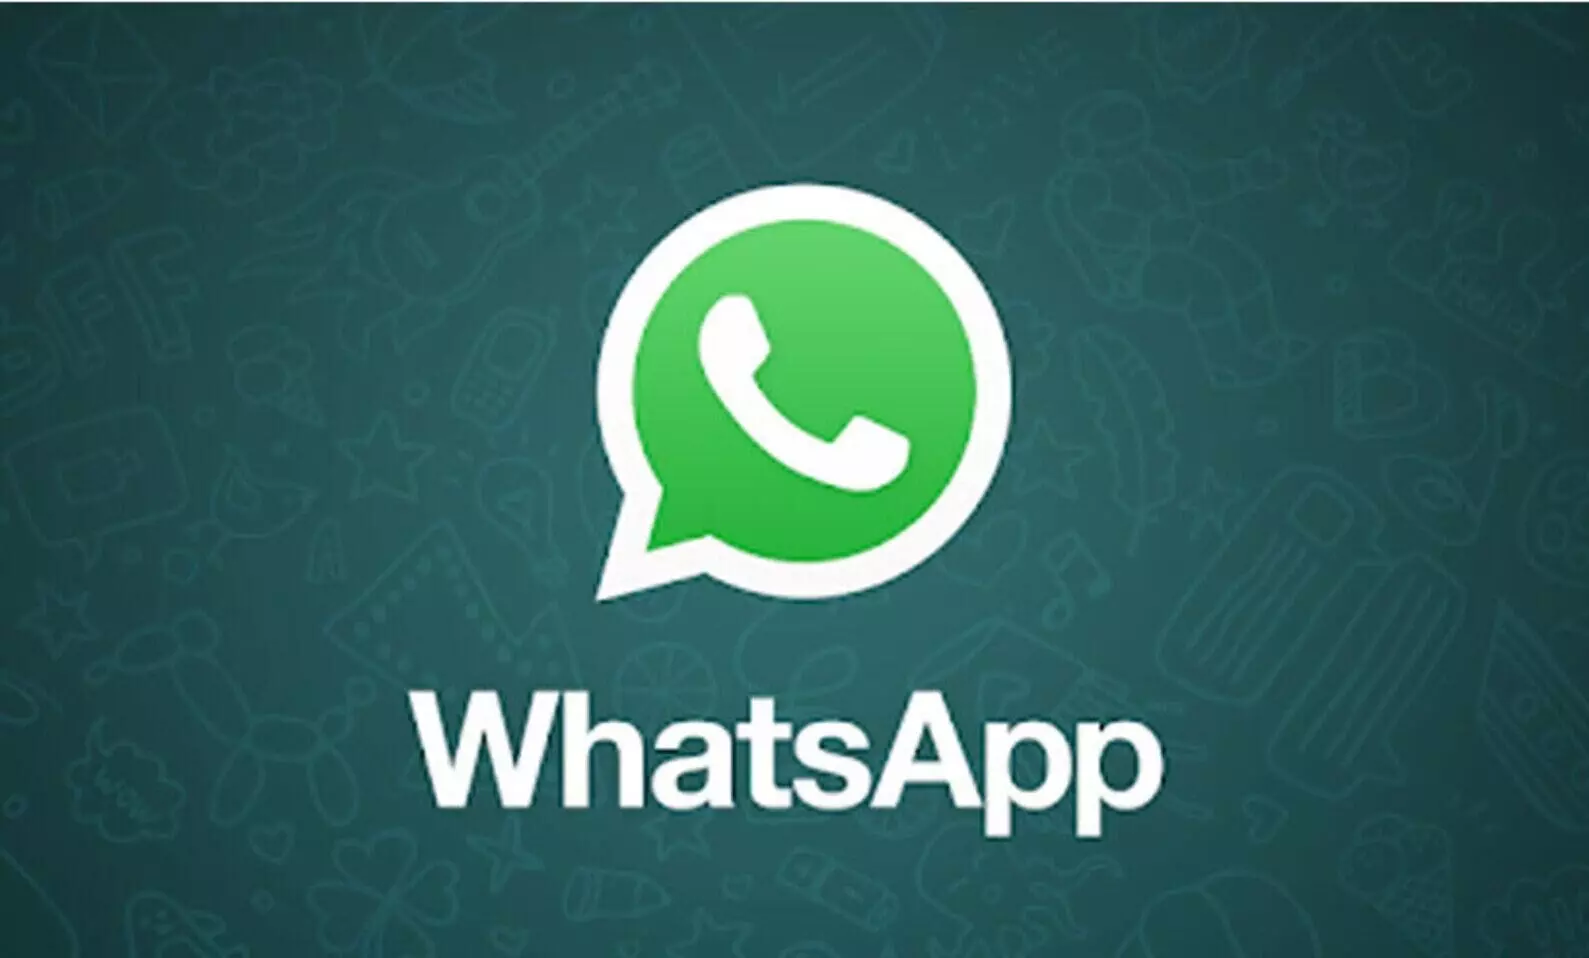 WhatsApp scraps May 15 deadline to accept updated privacy policy